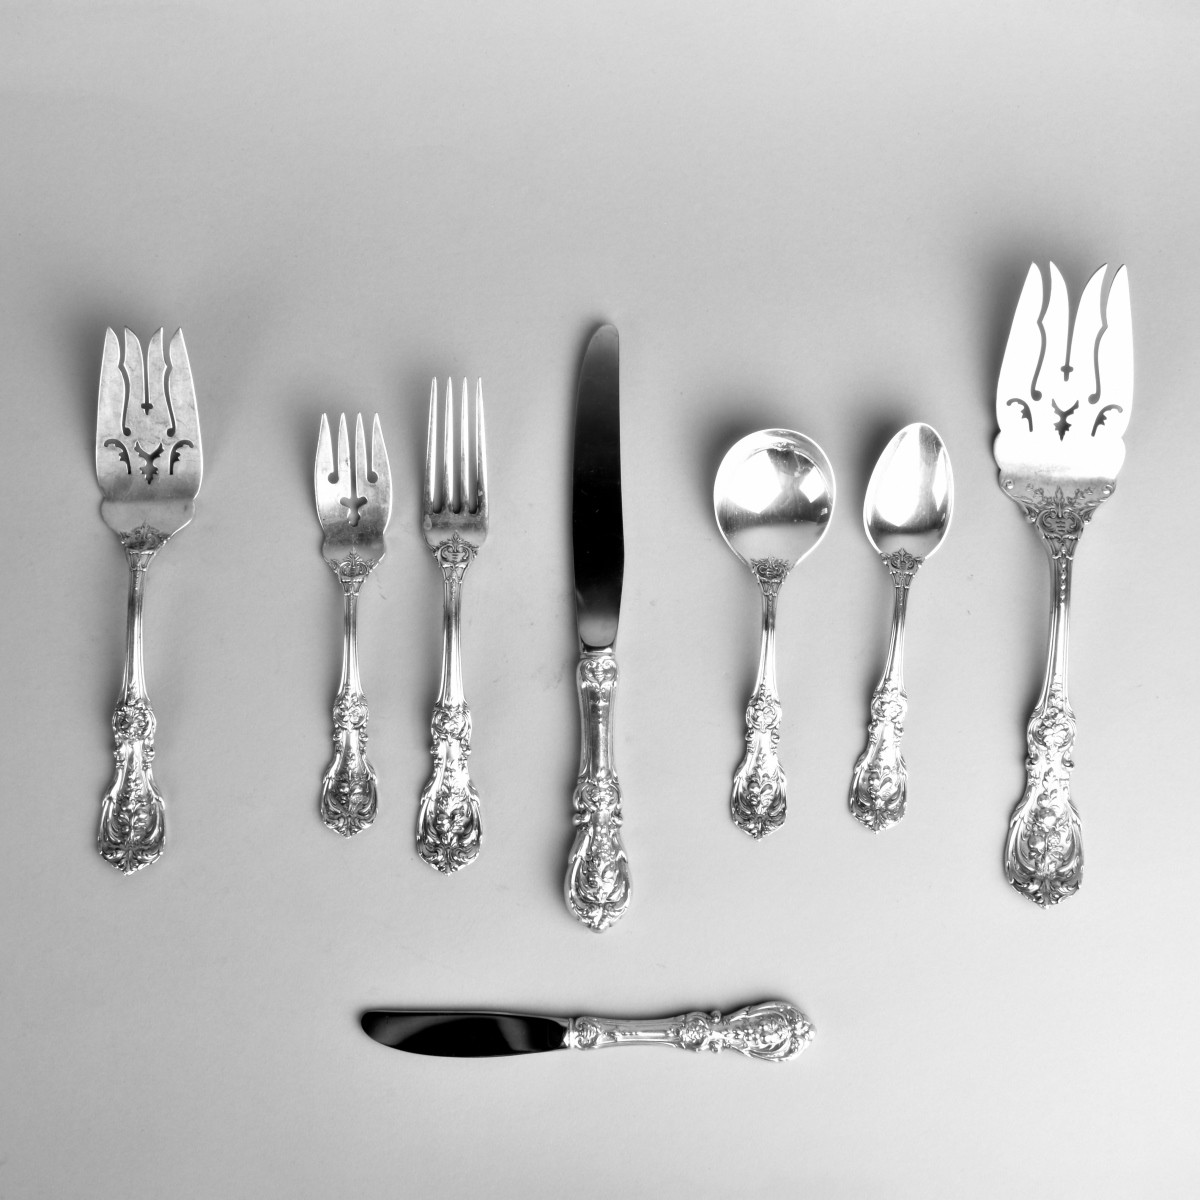 58 Pc. Reed and Barton Sterling Flatware